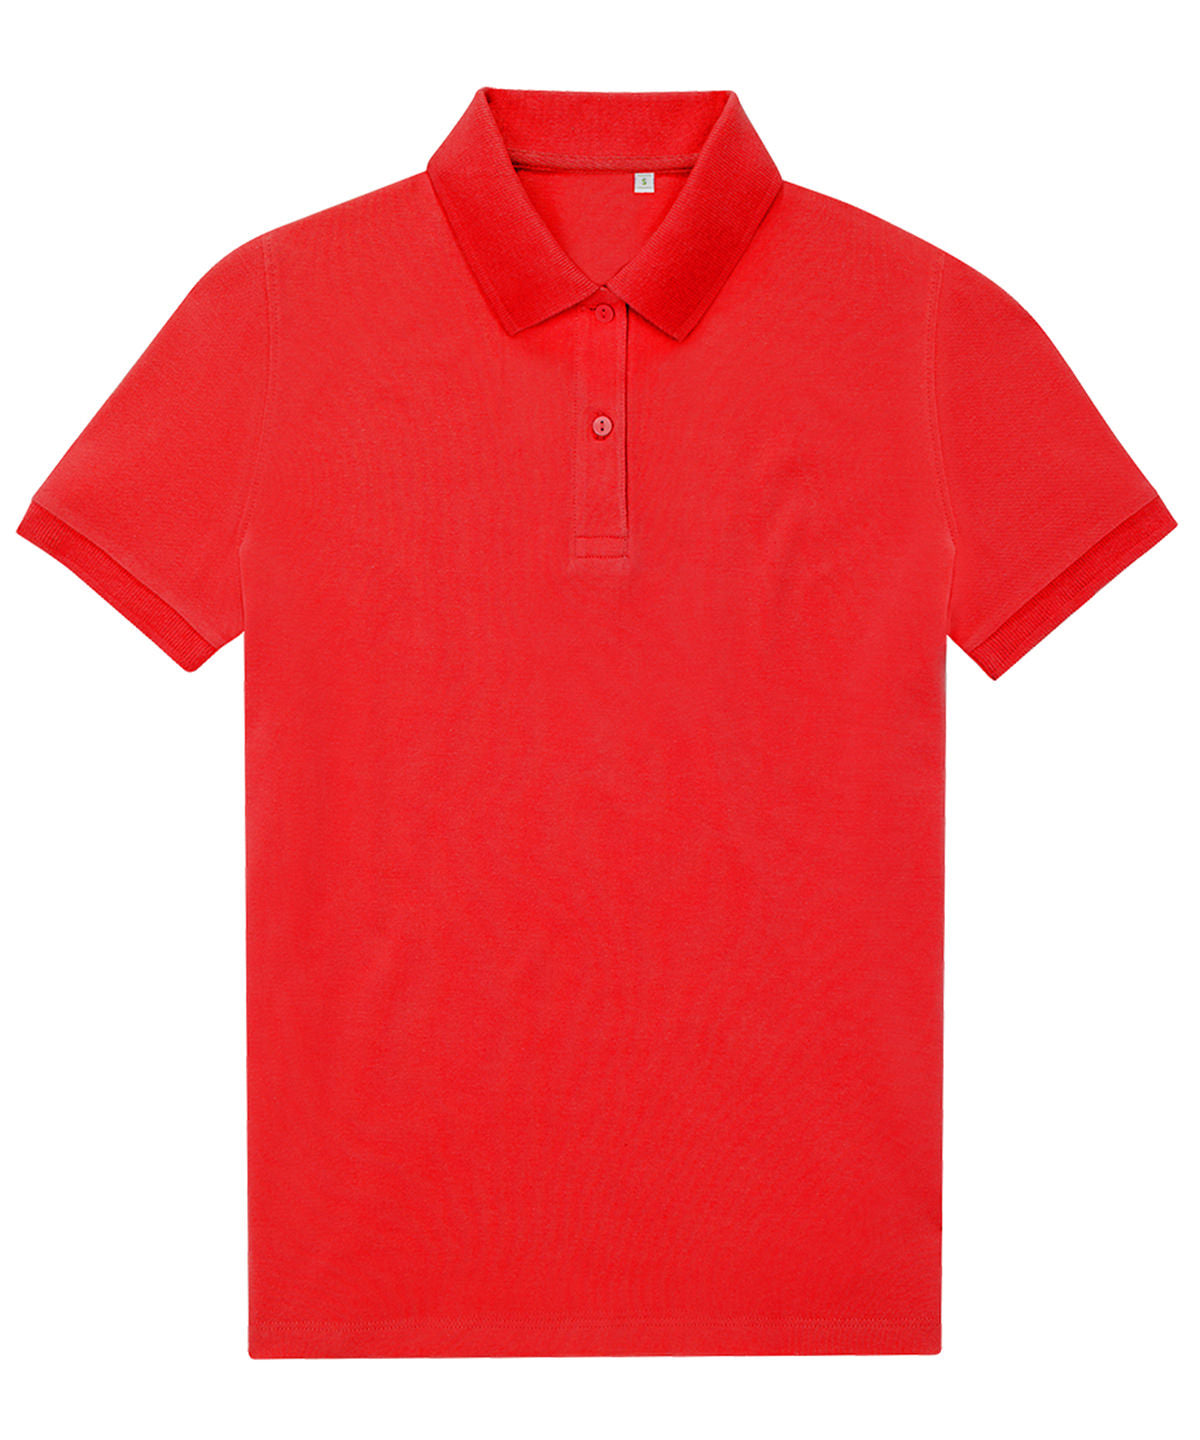 Personalised Polo Shirts - Mid Red B&C Collection B&C My Eco Polo 65/35 /Women